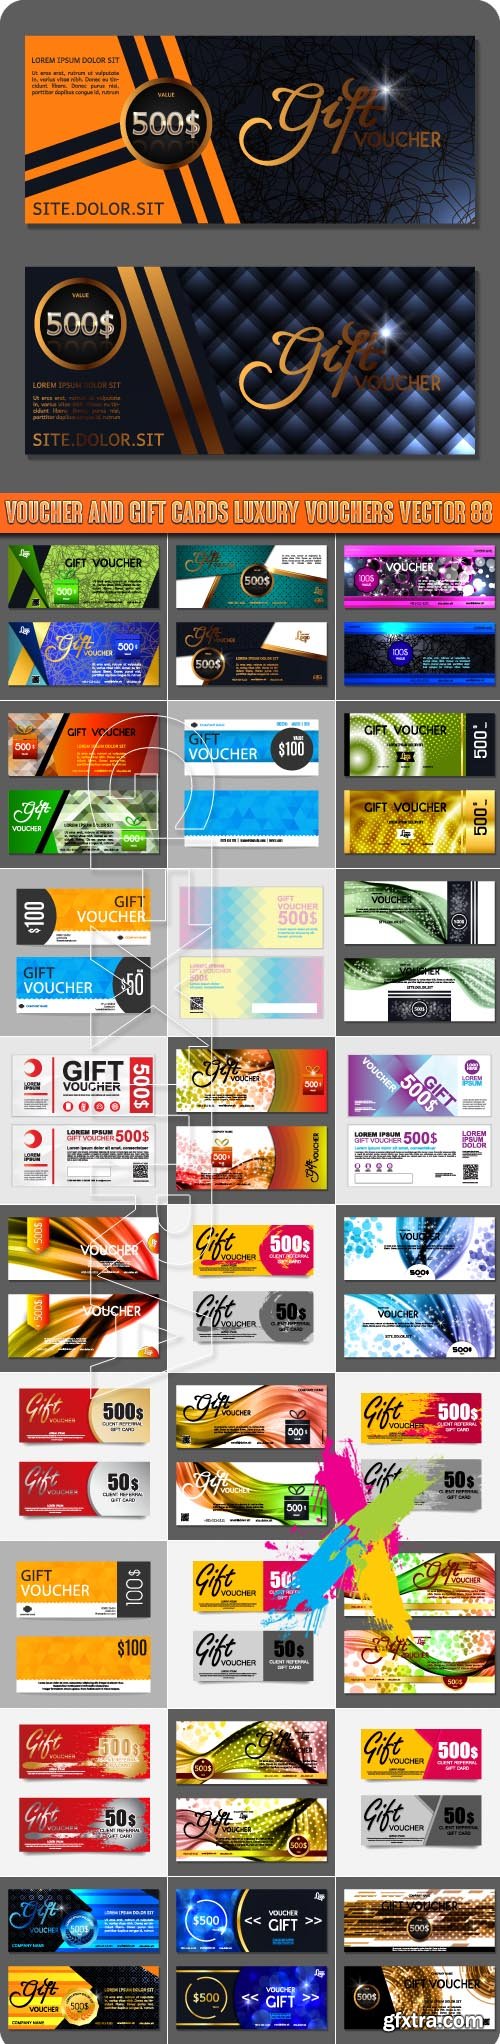 Voucher and gift cards luxury vouchers vector 88